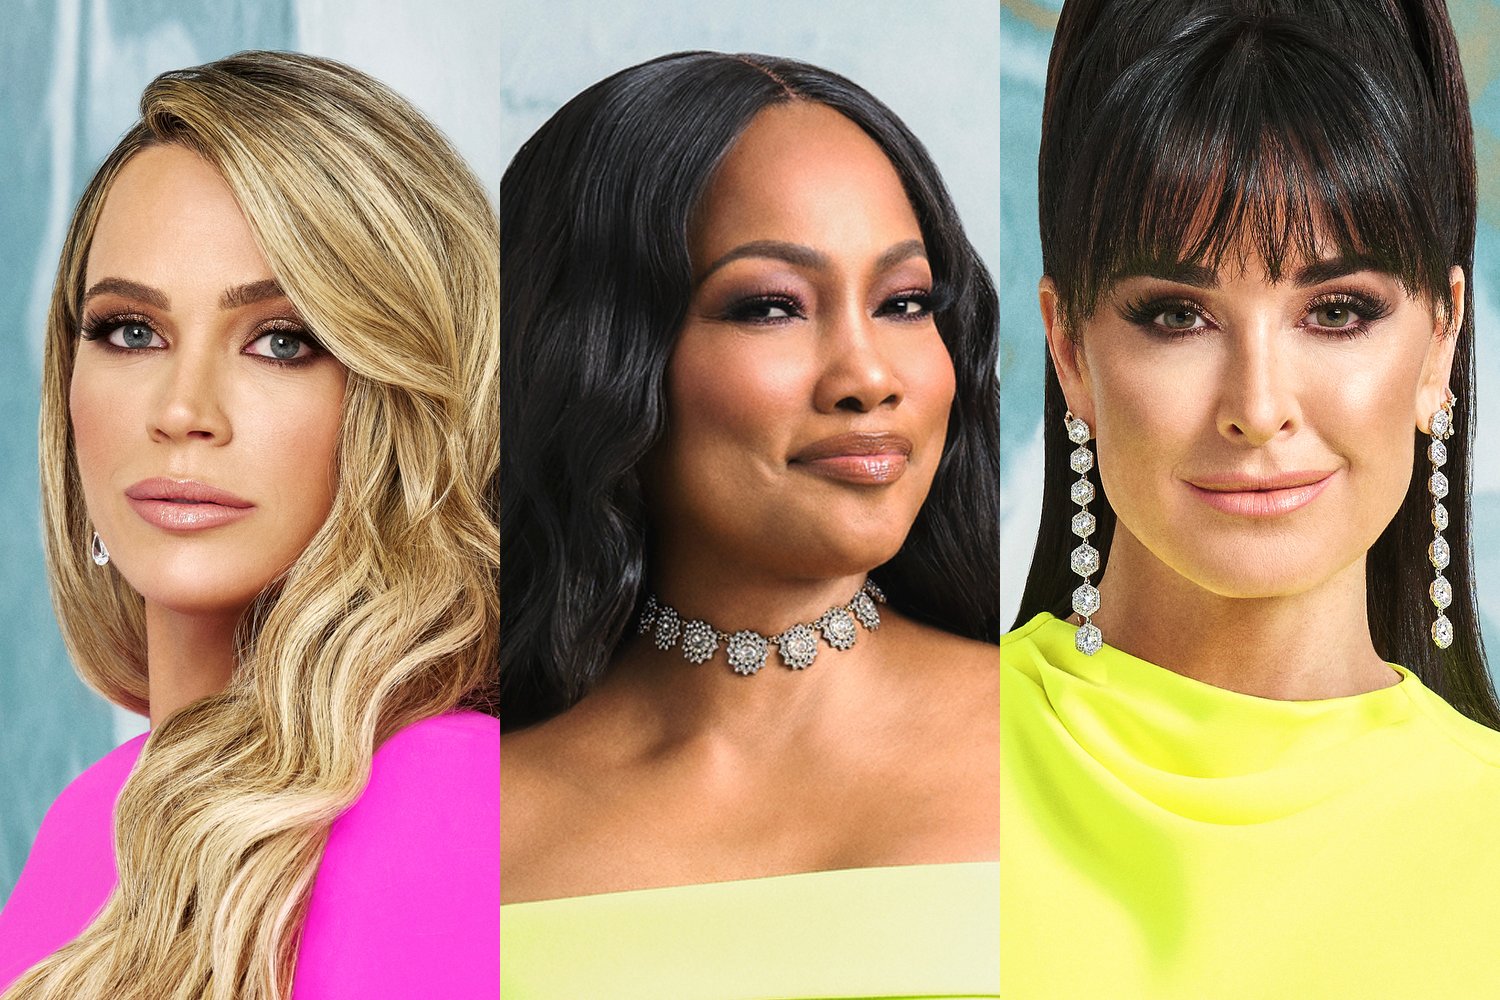 ‘RHOBH’: Garcelle Beauvais Throws Shade at Teddi Mellencamp and Kyle Richards Jumps in to Defend Her